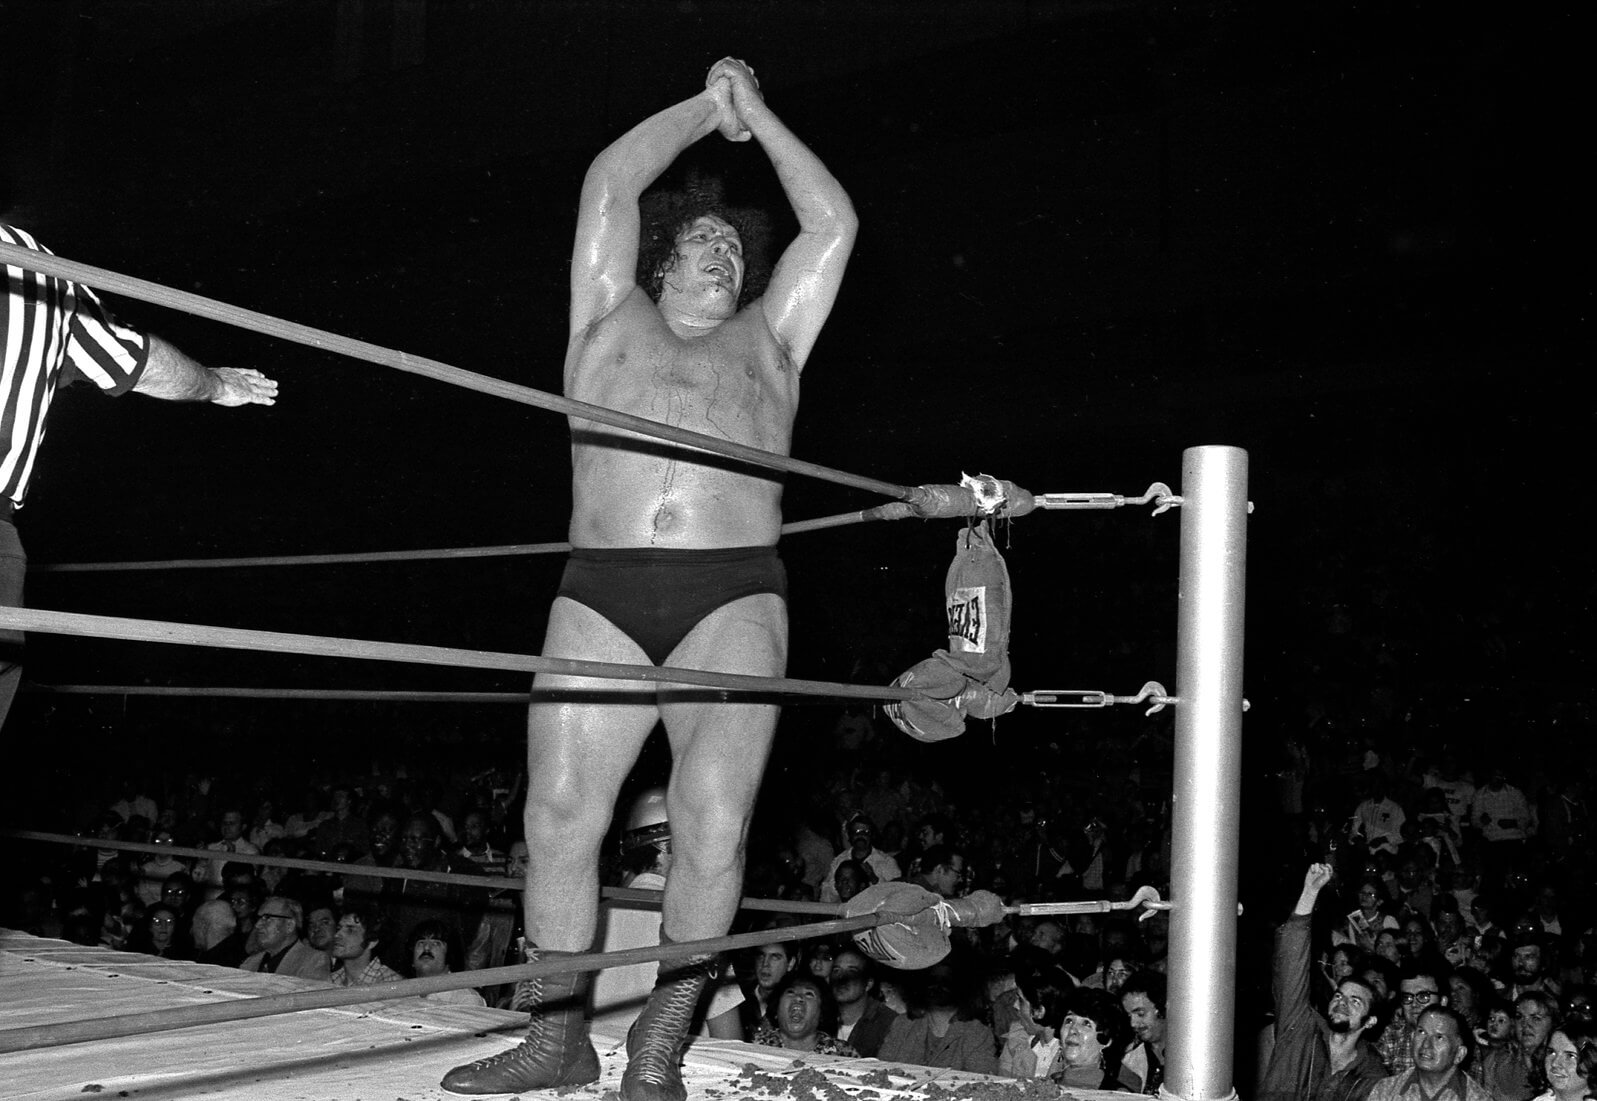 Andre the Giant in Ted Pushinsky's <em>Fightin' and Dancin'</em> series.